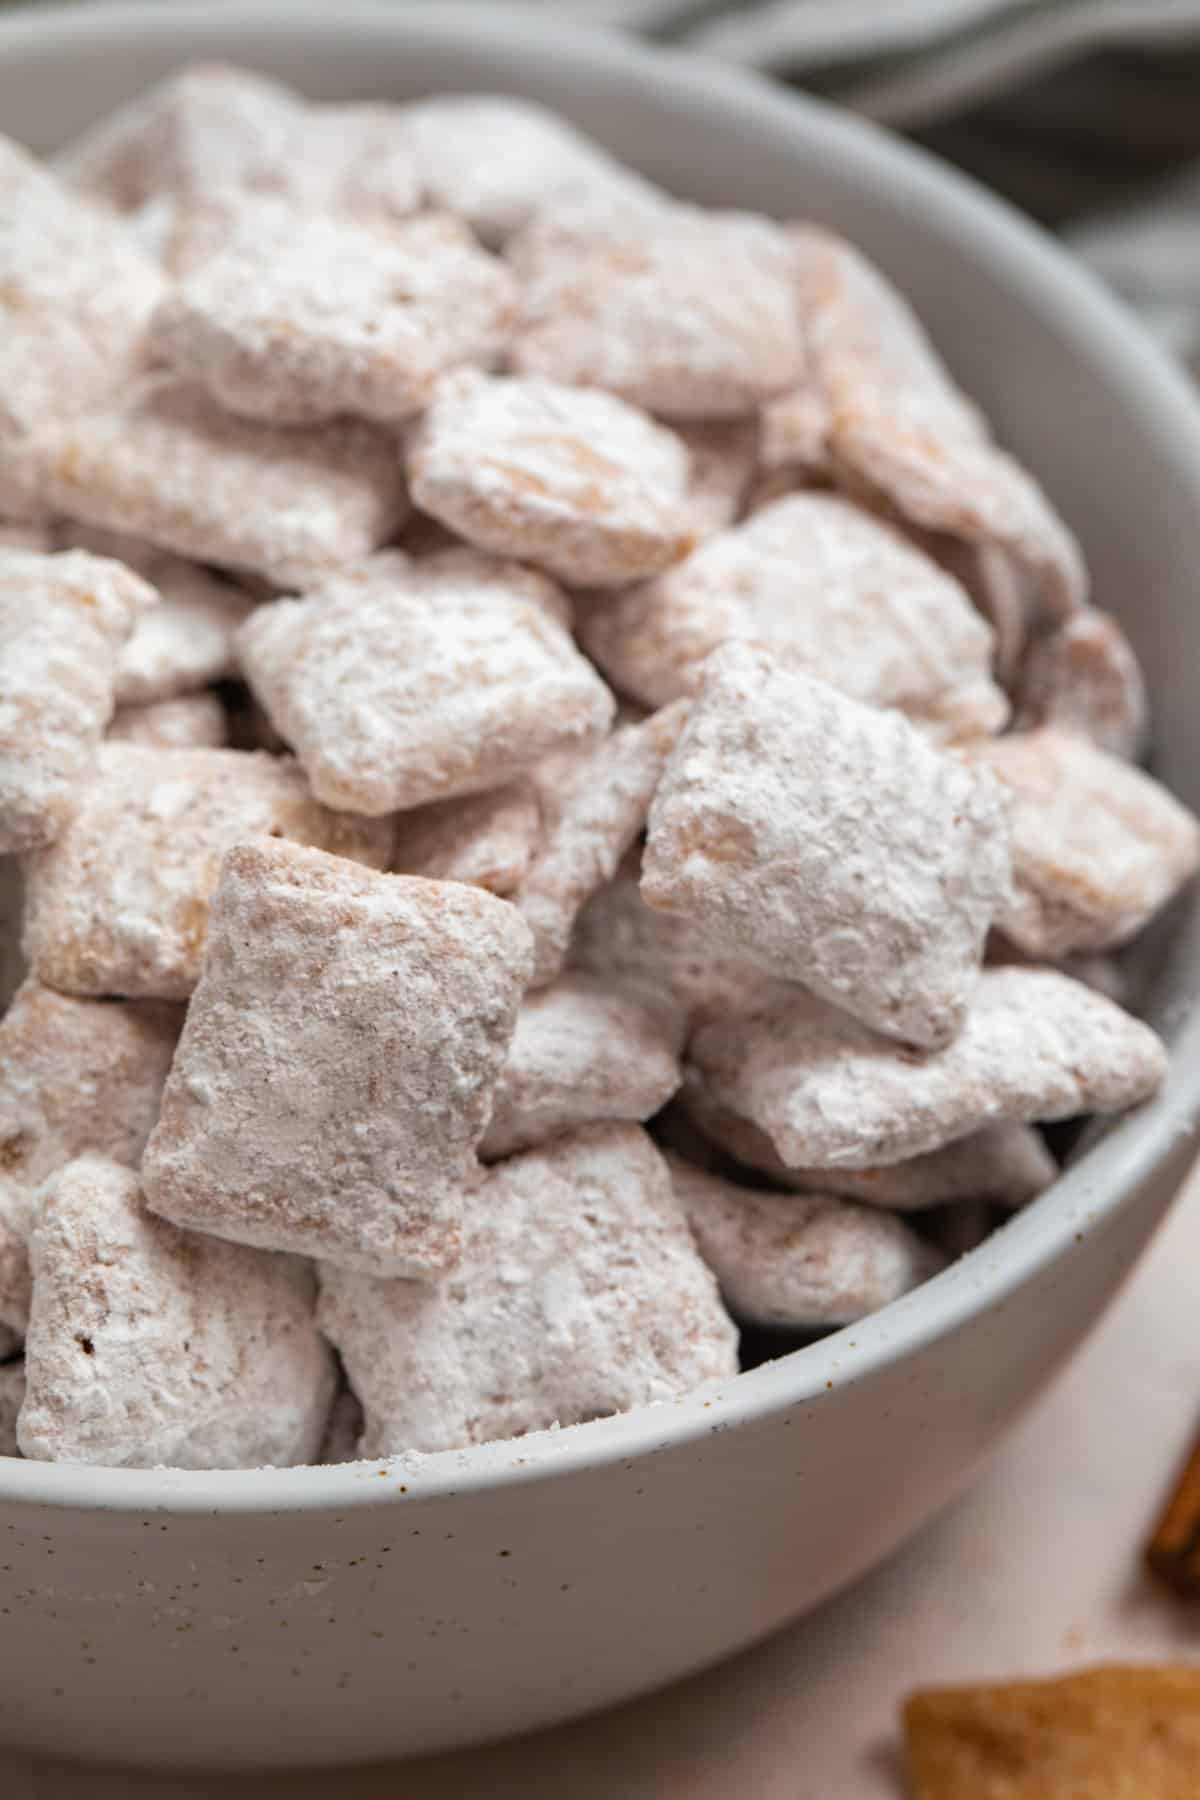 Bowl of cinnamon chex mix with powdered sugar.